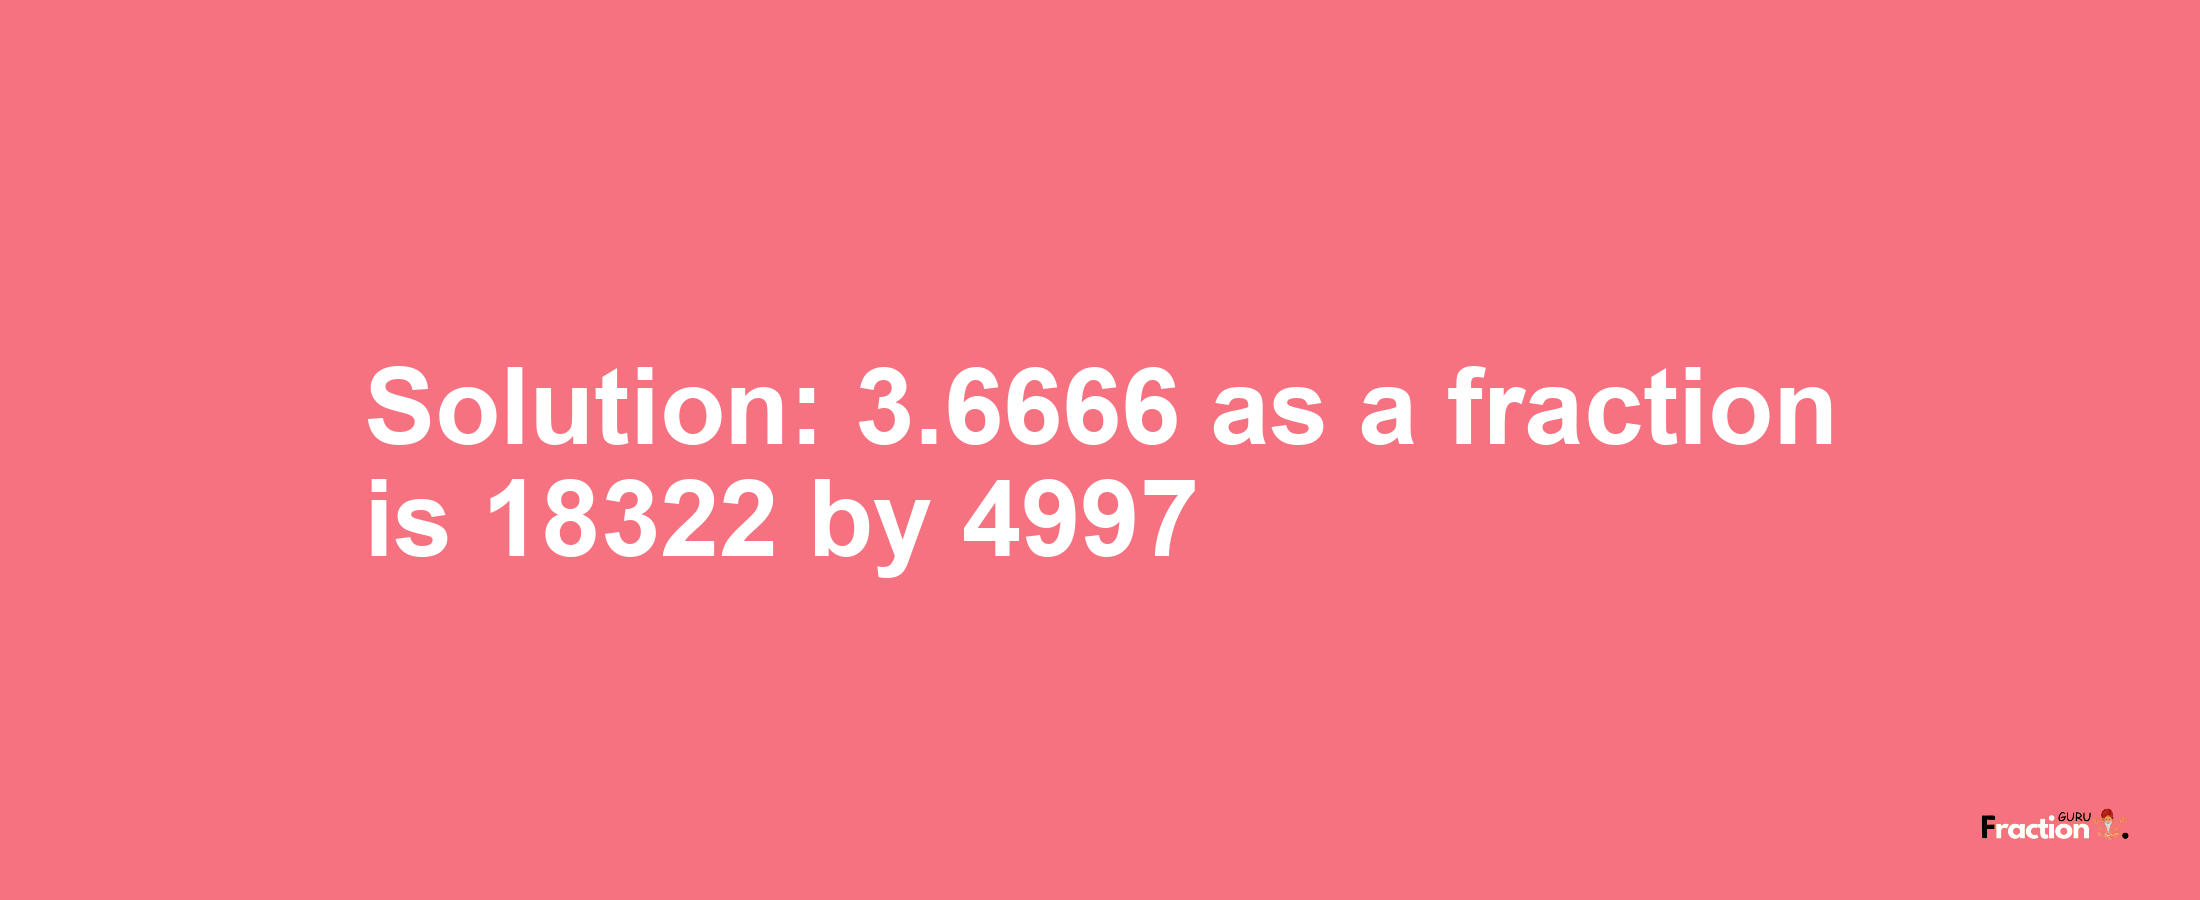 Solution:3.6666 as a fraction is 18322/4997